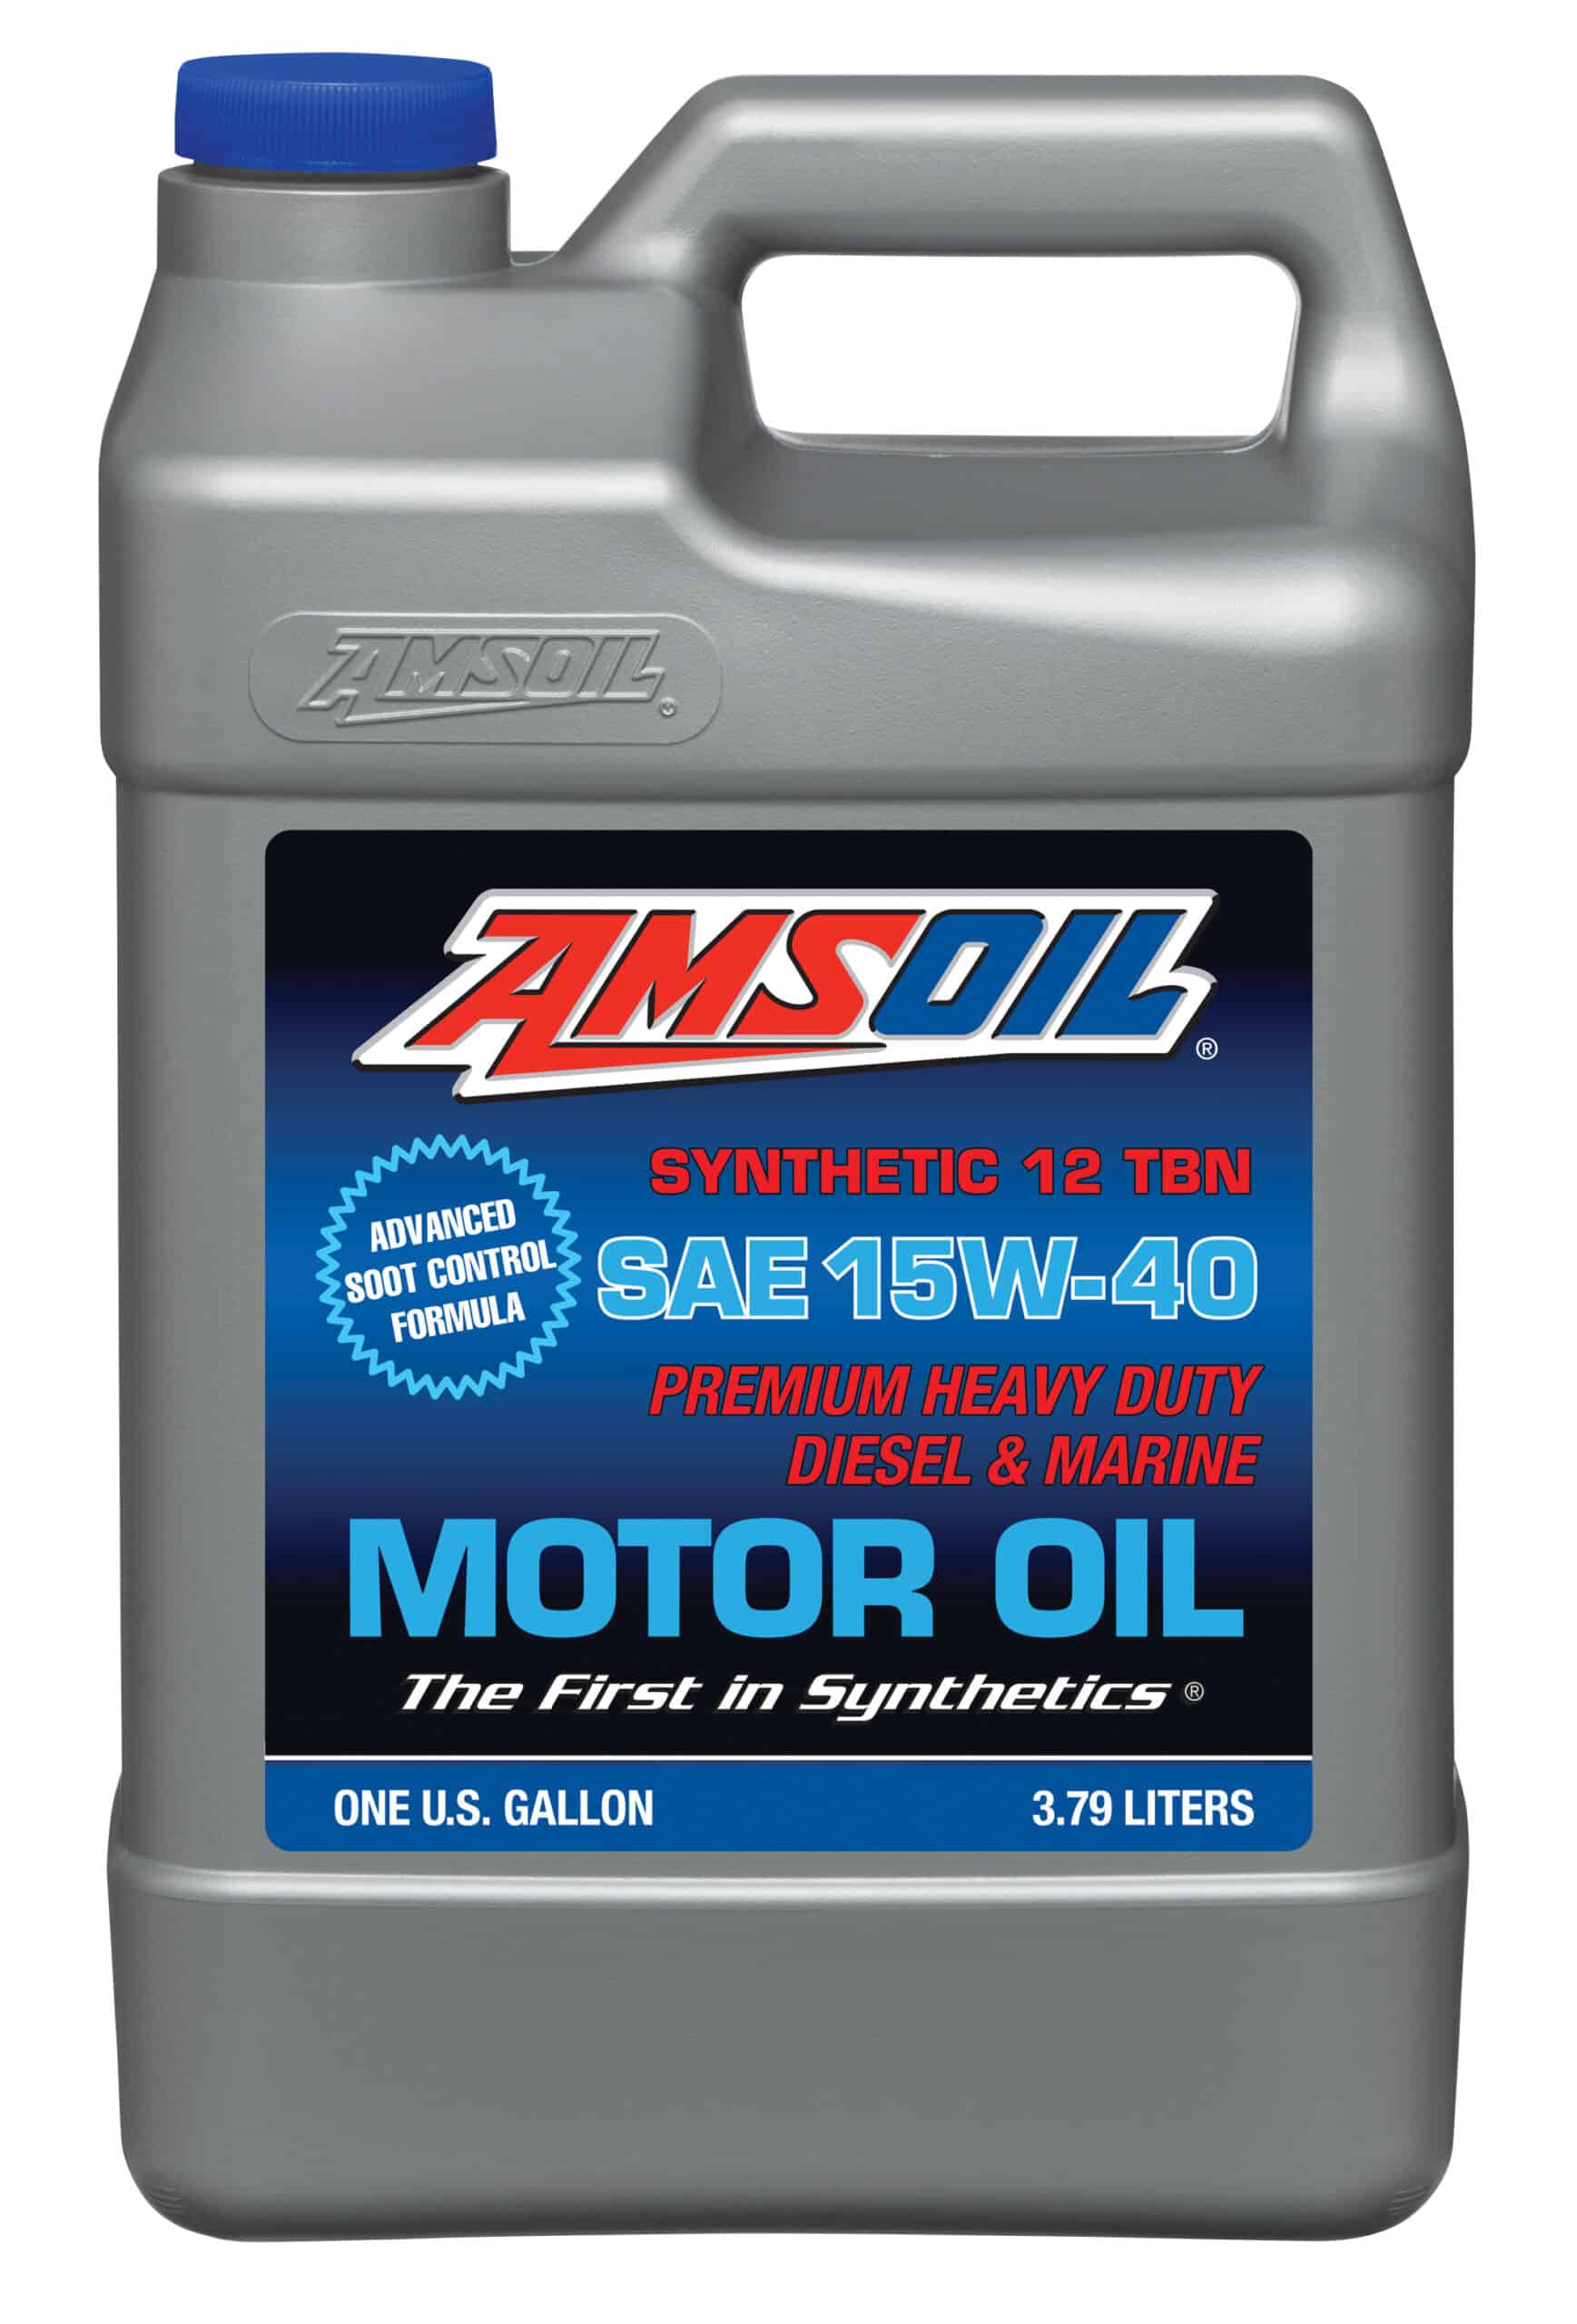 A gallon of AMSOIL Synthetic Heavy Duty Diesel & Marine Motor Oil, formulated for long-lasting performance & protection.